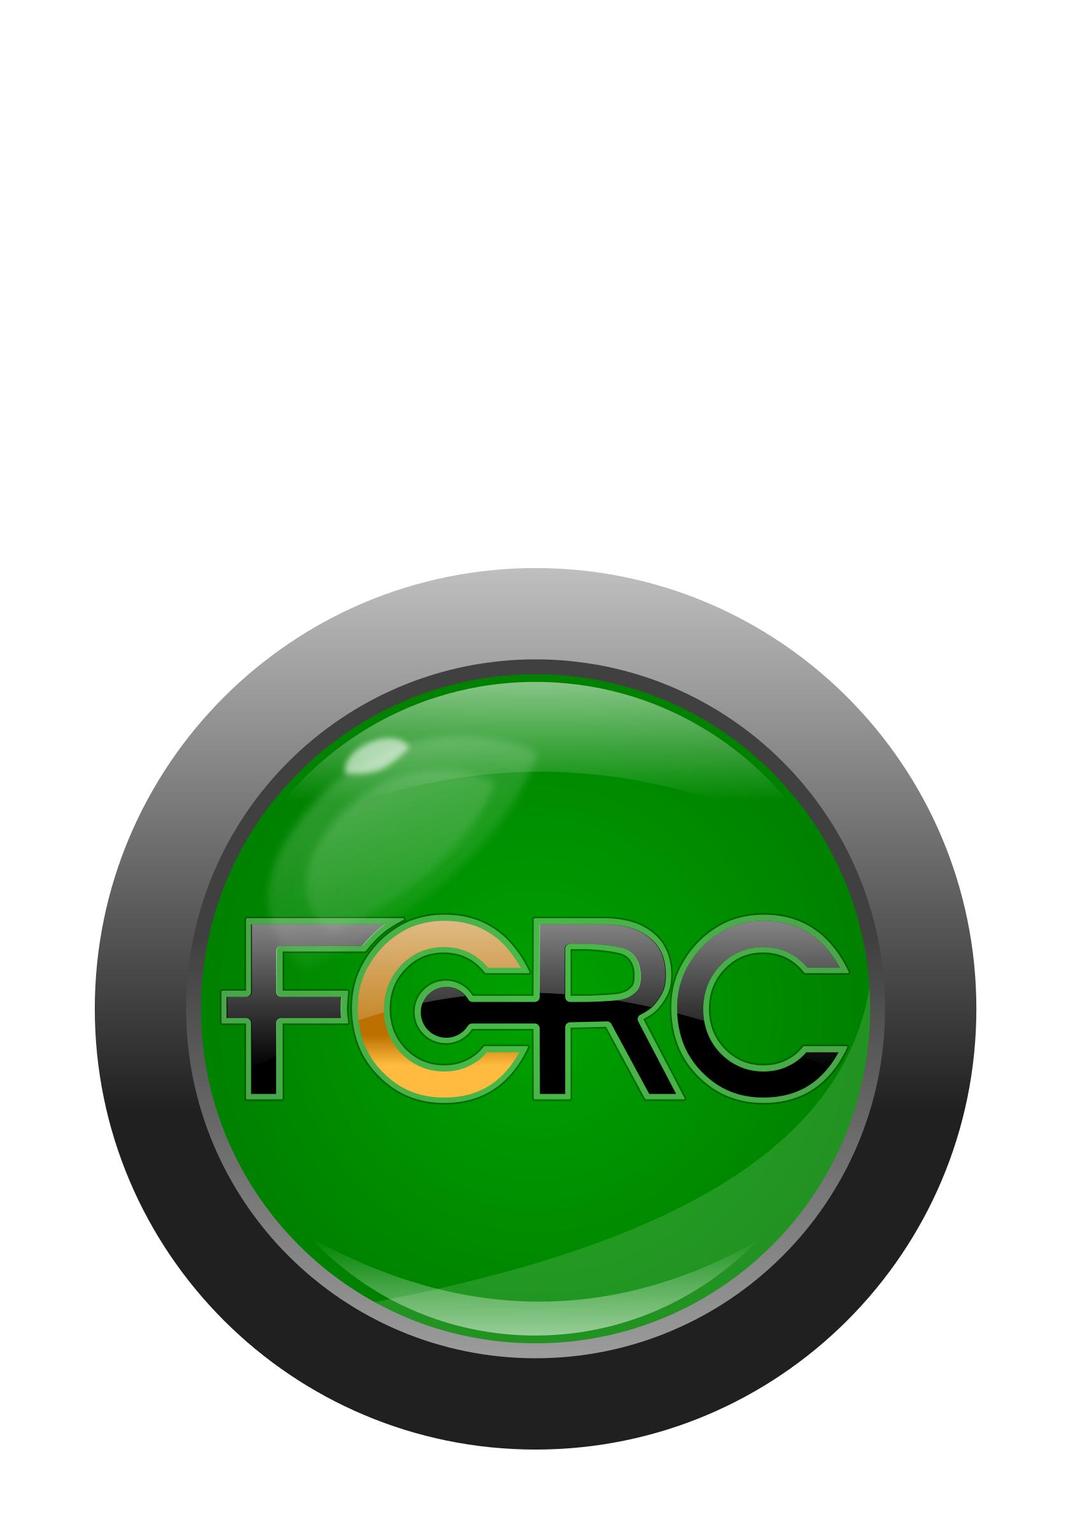 FCRC button/logo with text png transparent